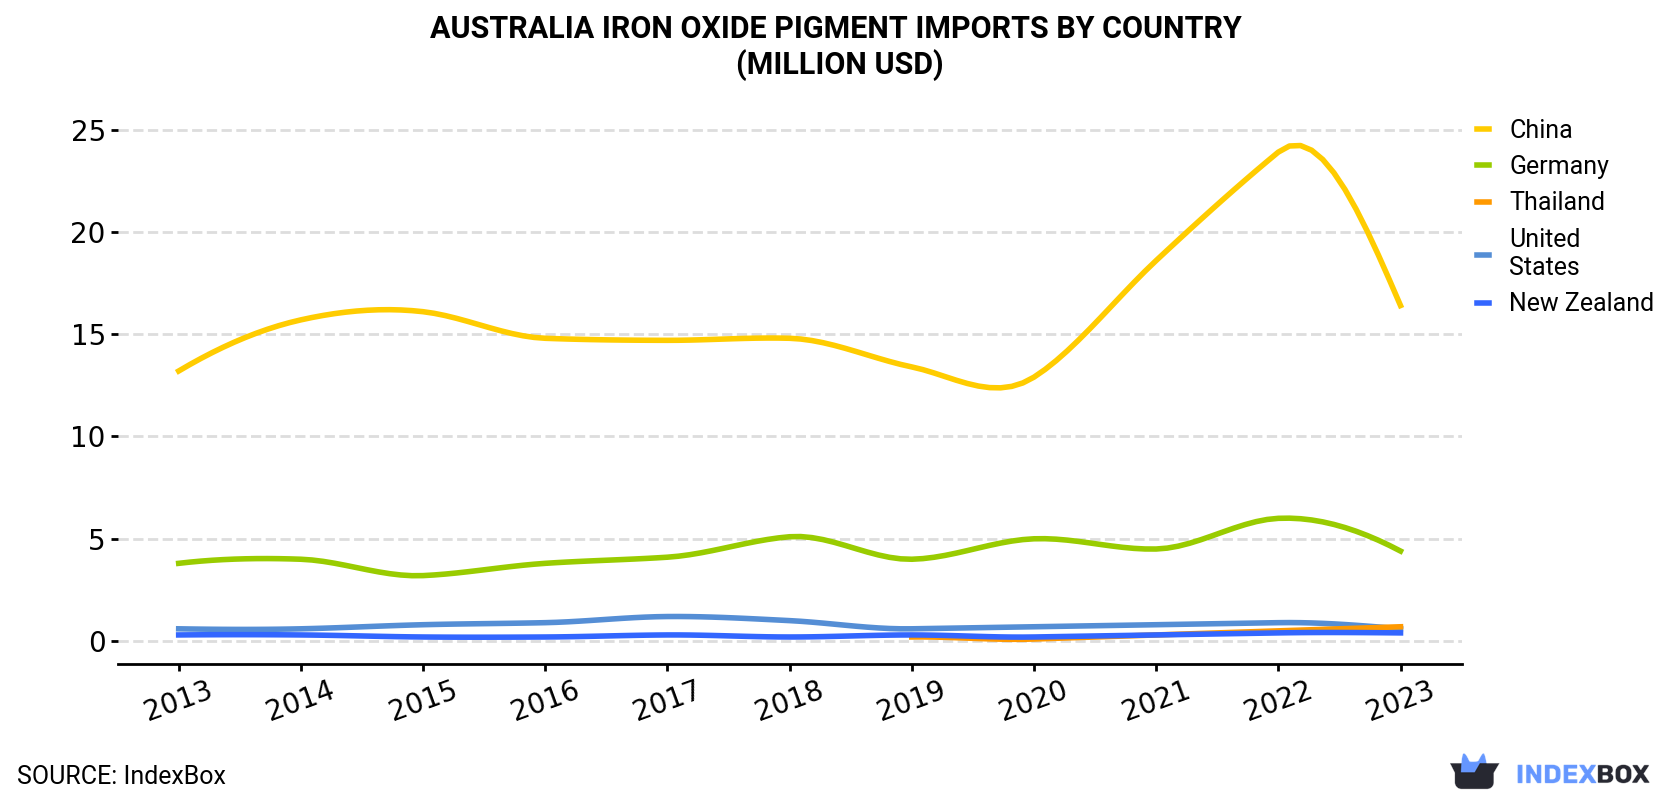 Australia Iron Oxide Pigment Imports By Country (Million USD)